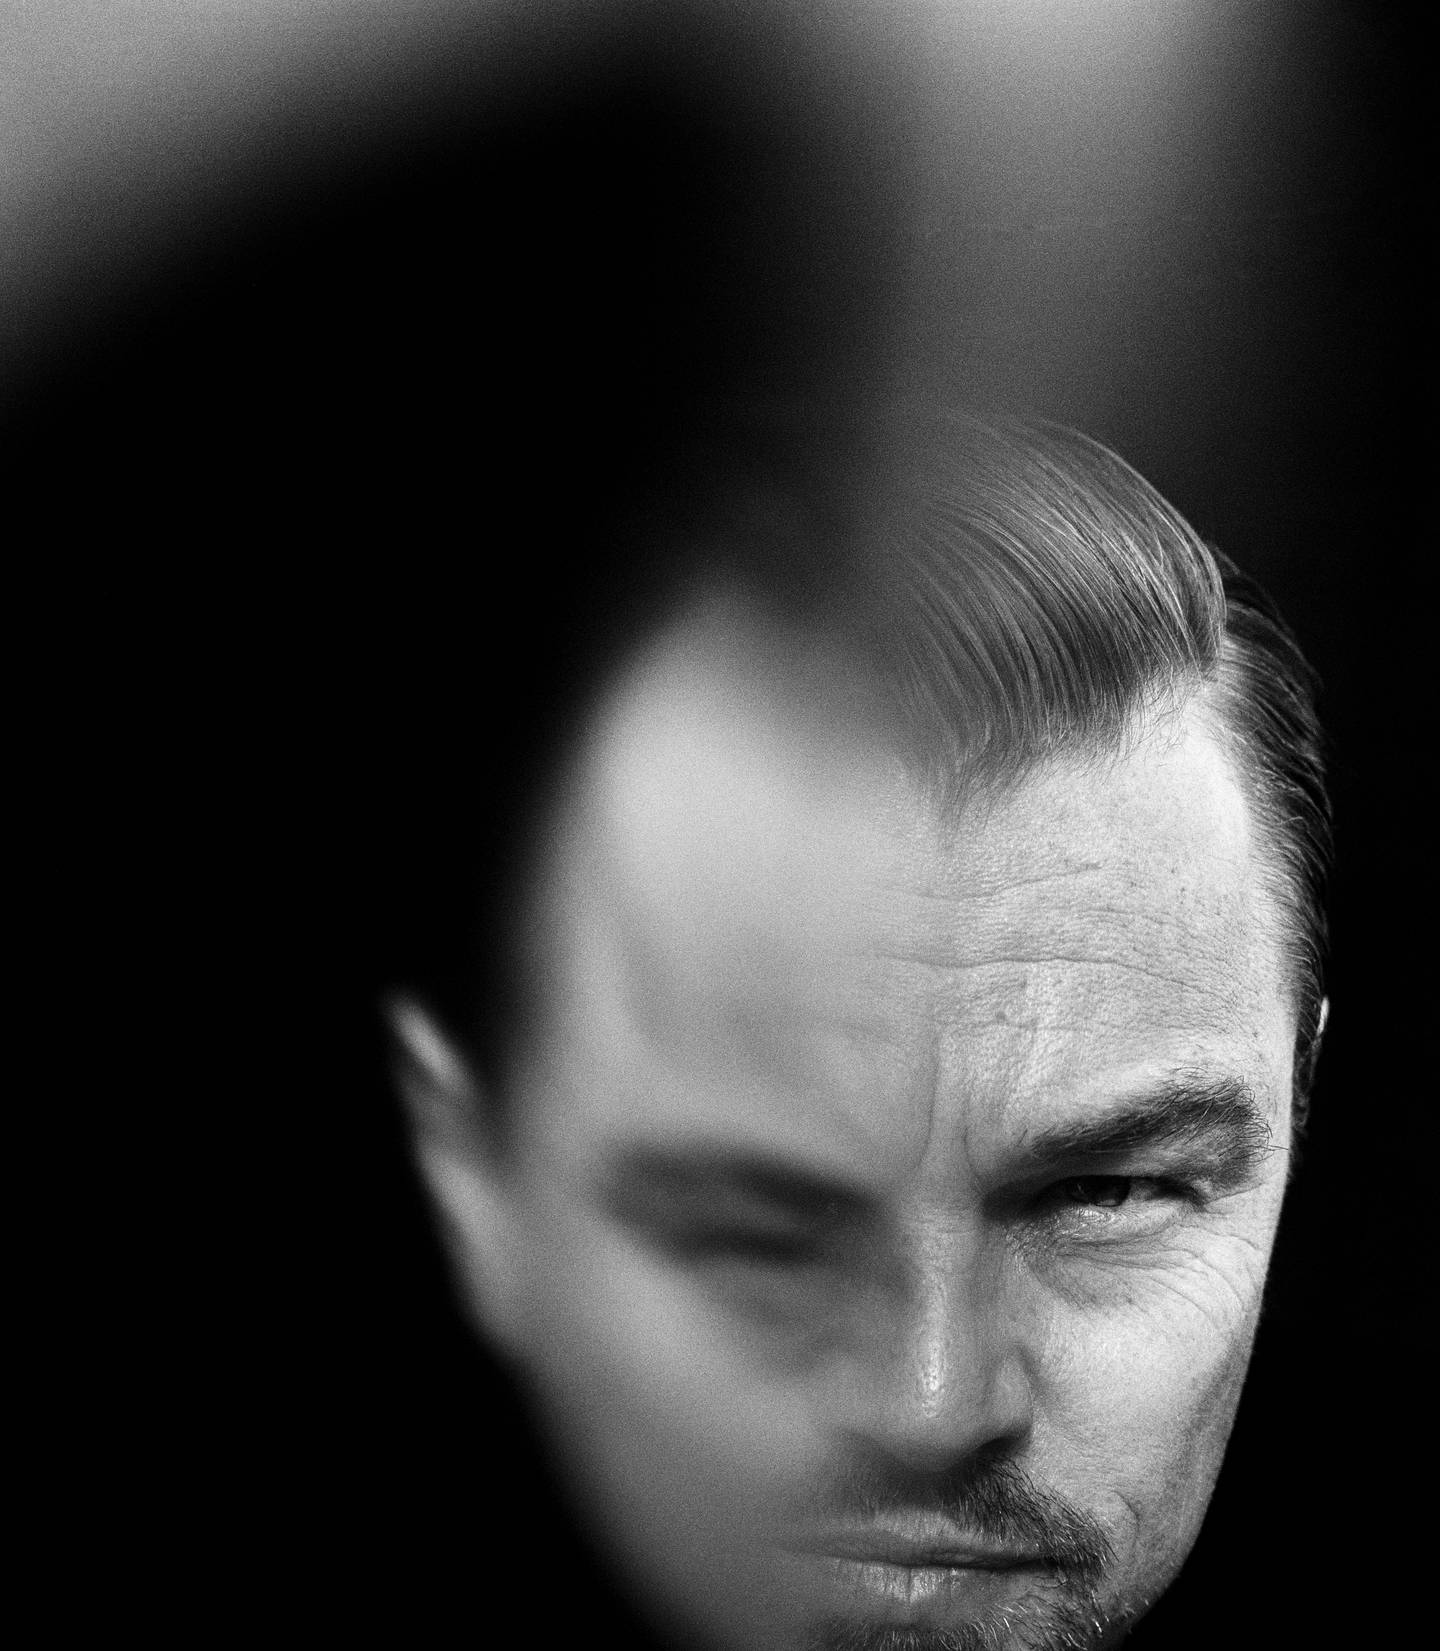 Leonardo DiCaprio photographed by Jack Davison for The New York Times Magazine’s “Great Performers” portfolio in 2019.